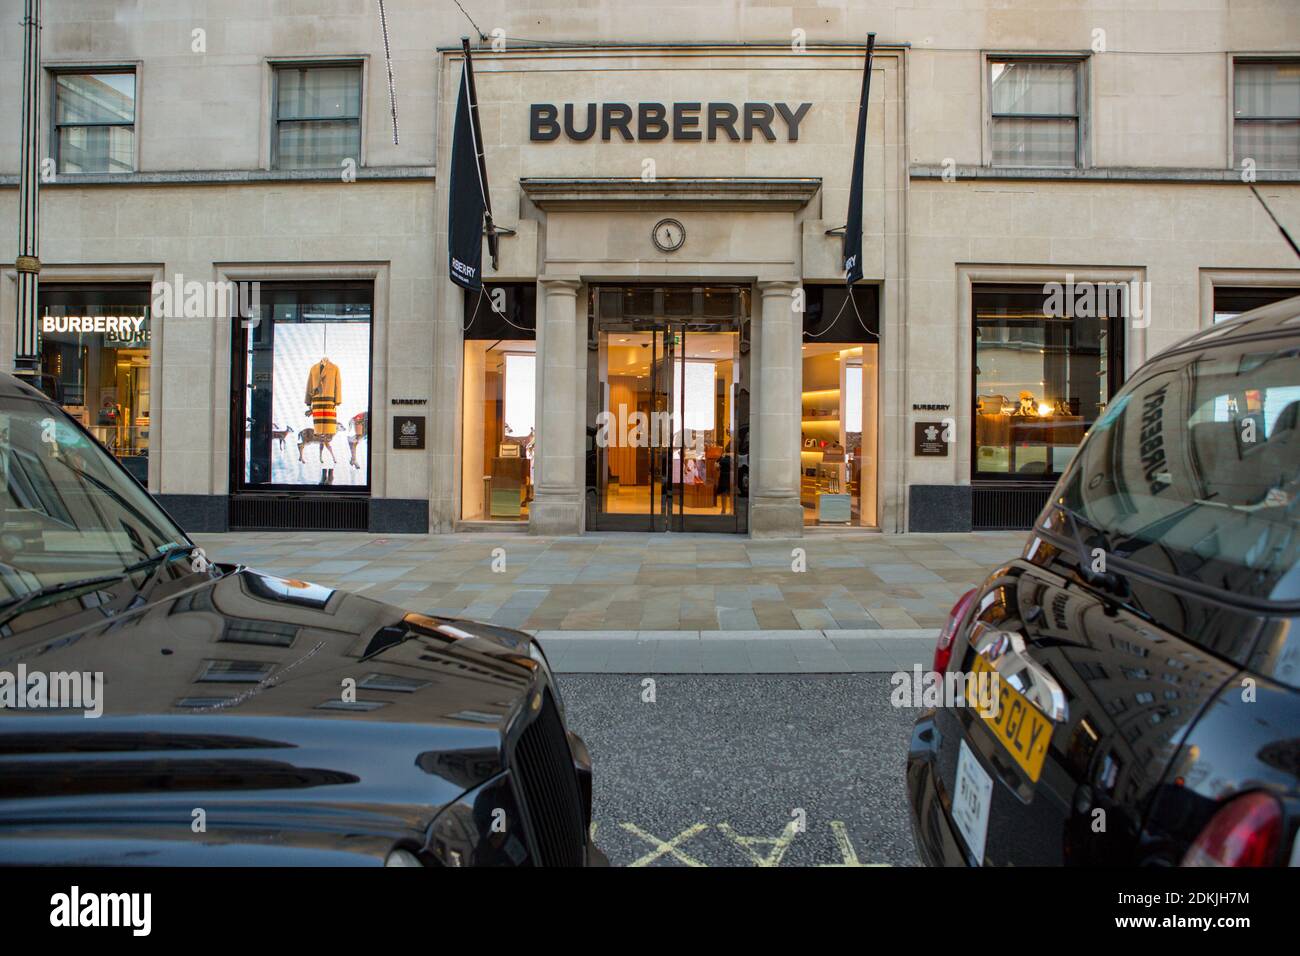 London, 15th Dec, 2020. London Taxis aka Black Cabs seen parked outside Burberry Store in New Bon Street, Mayfair. Credit: Pietro Recchia/SOPA Images/ZUMA Wire/Alamy Live News Stock Photo - Alamy